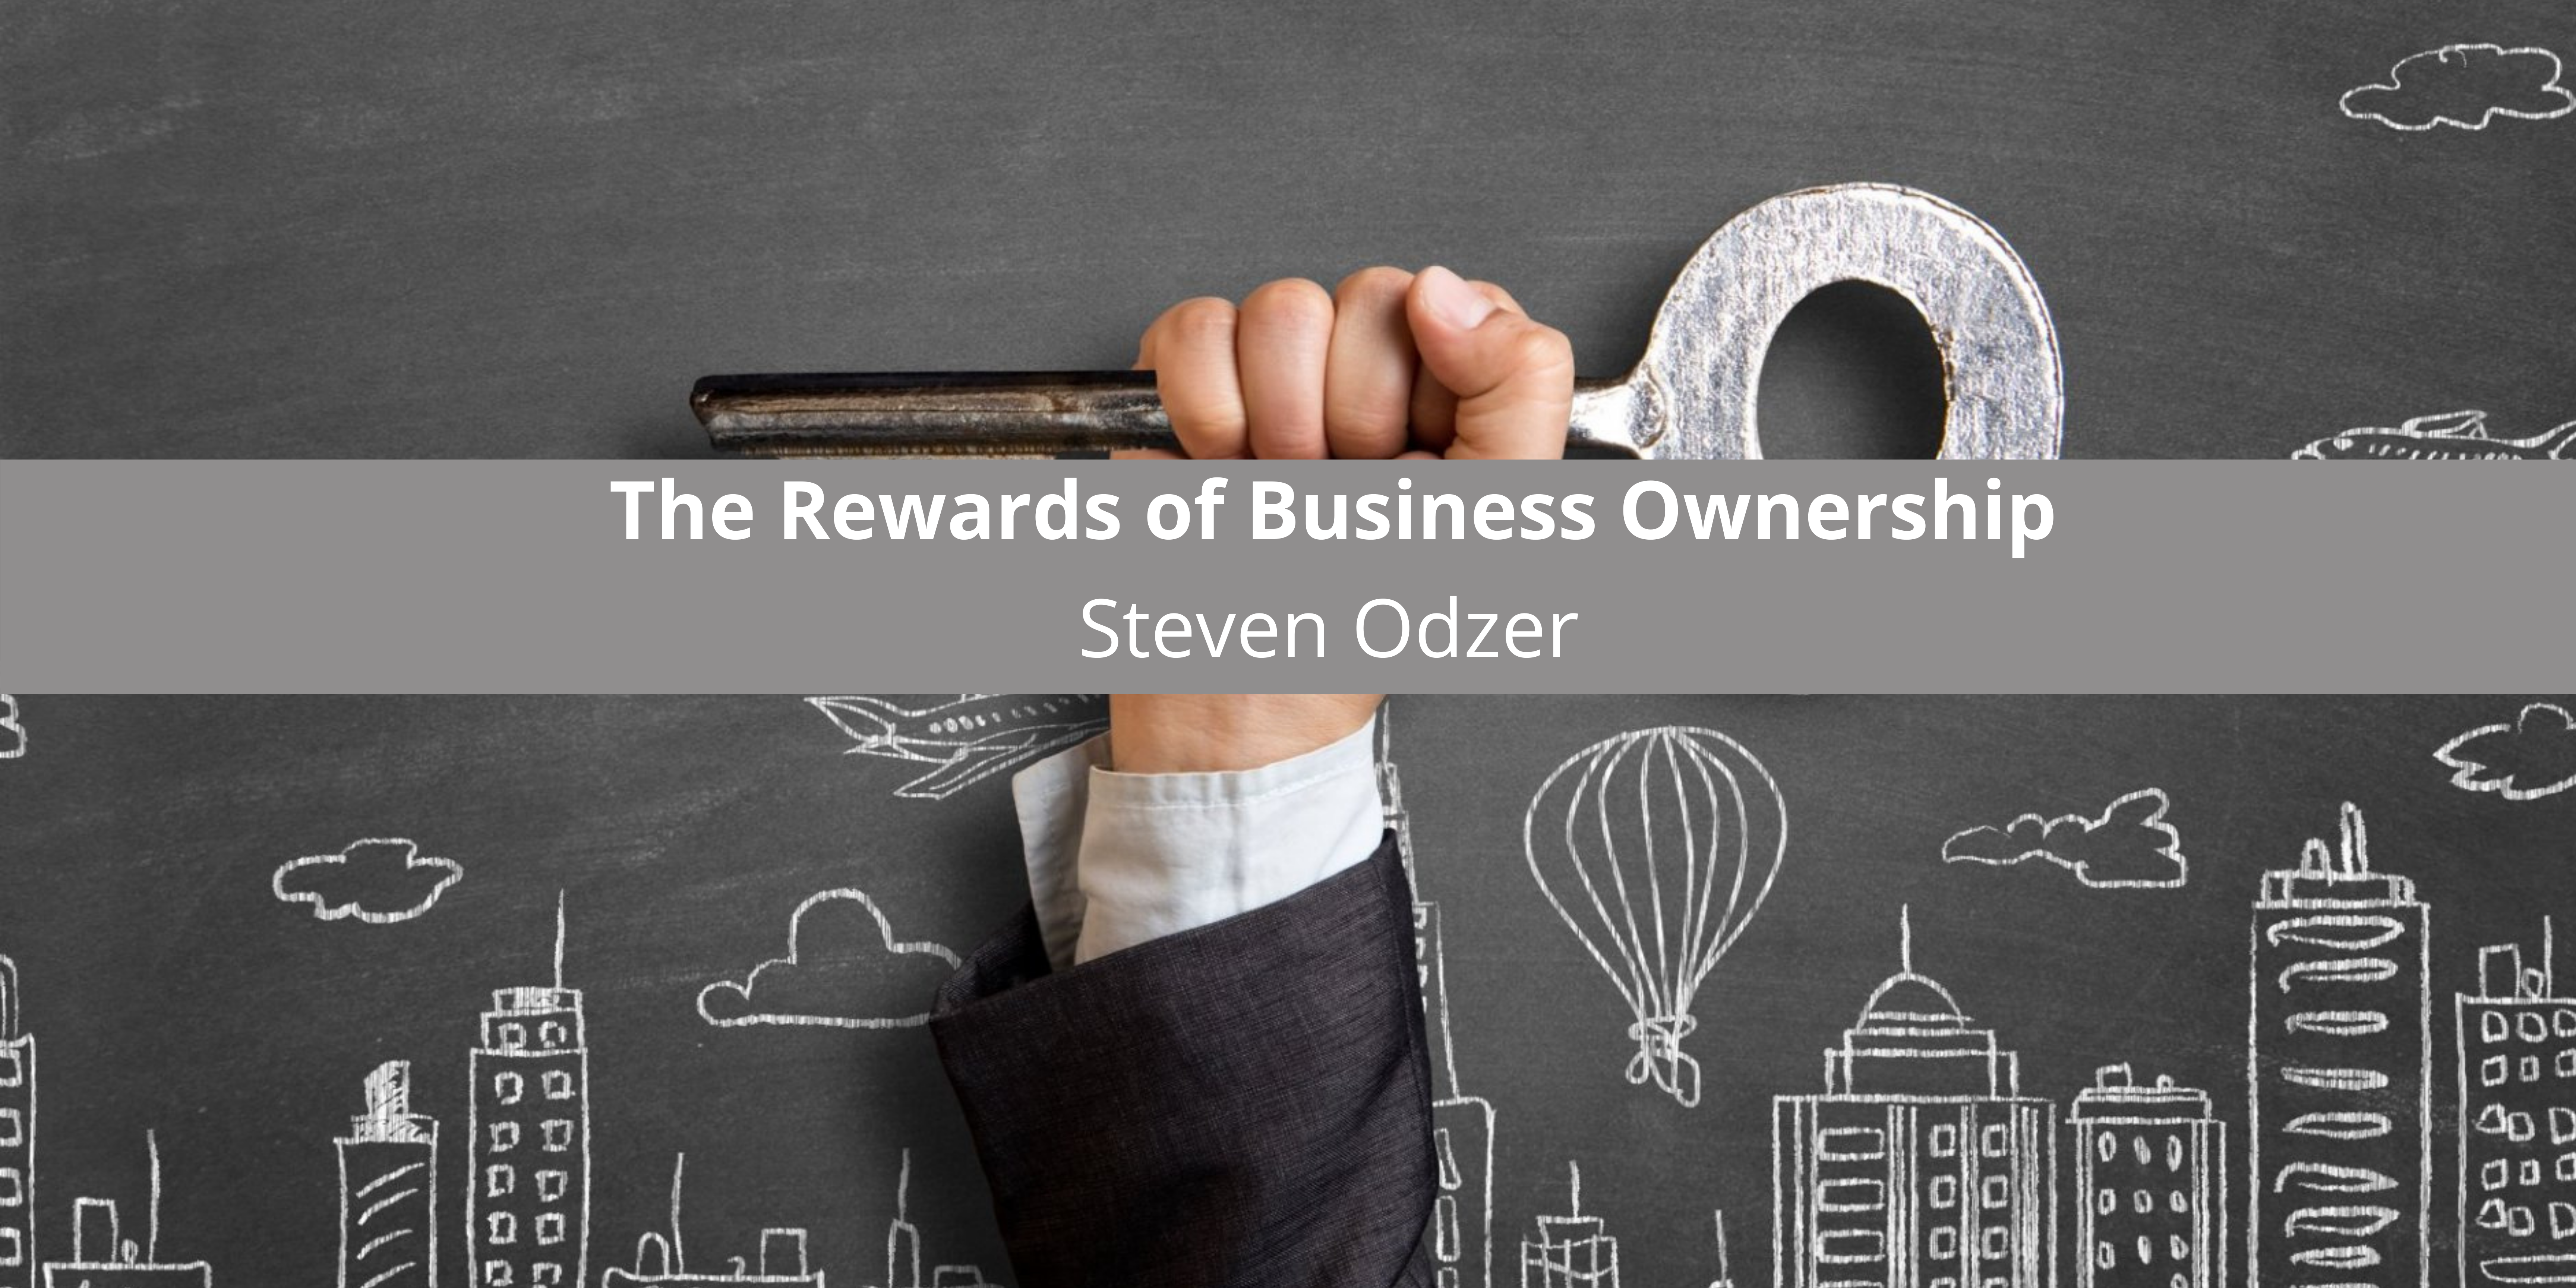 Steven Odzer of Woodmere, NY On the Rewards of Business Ownership